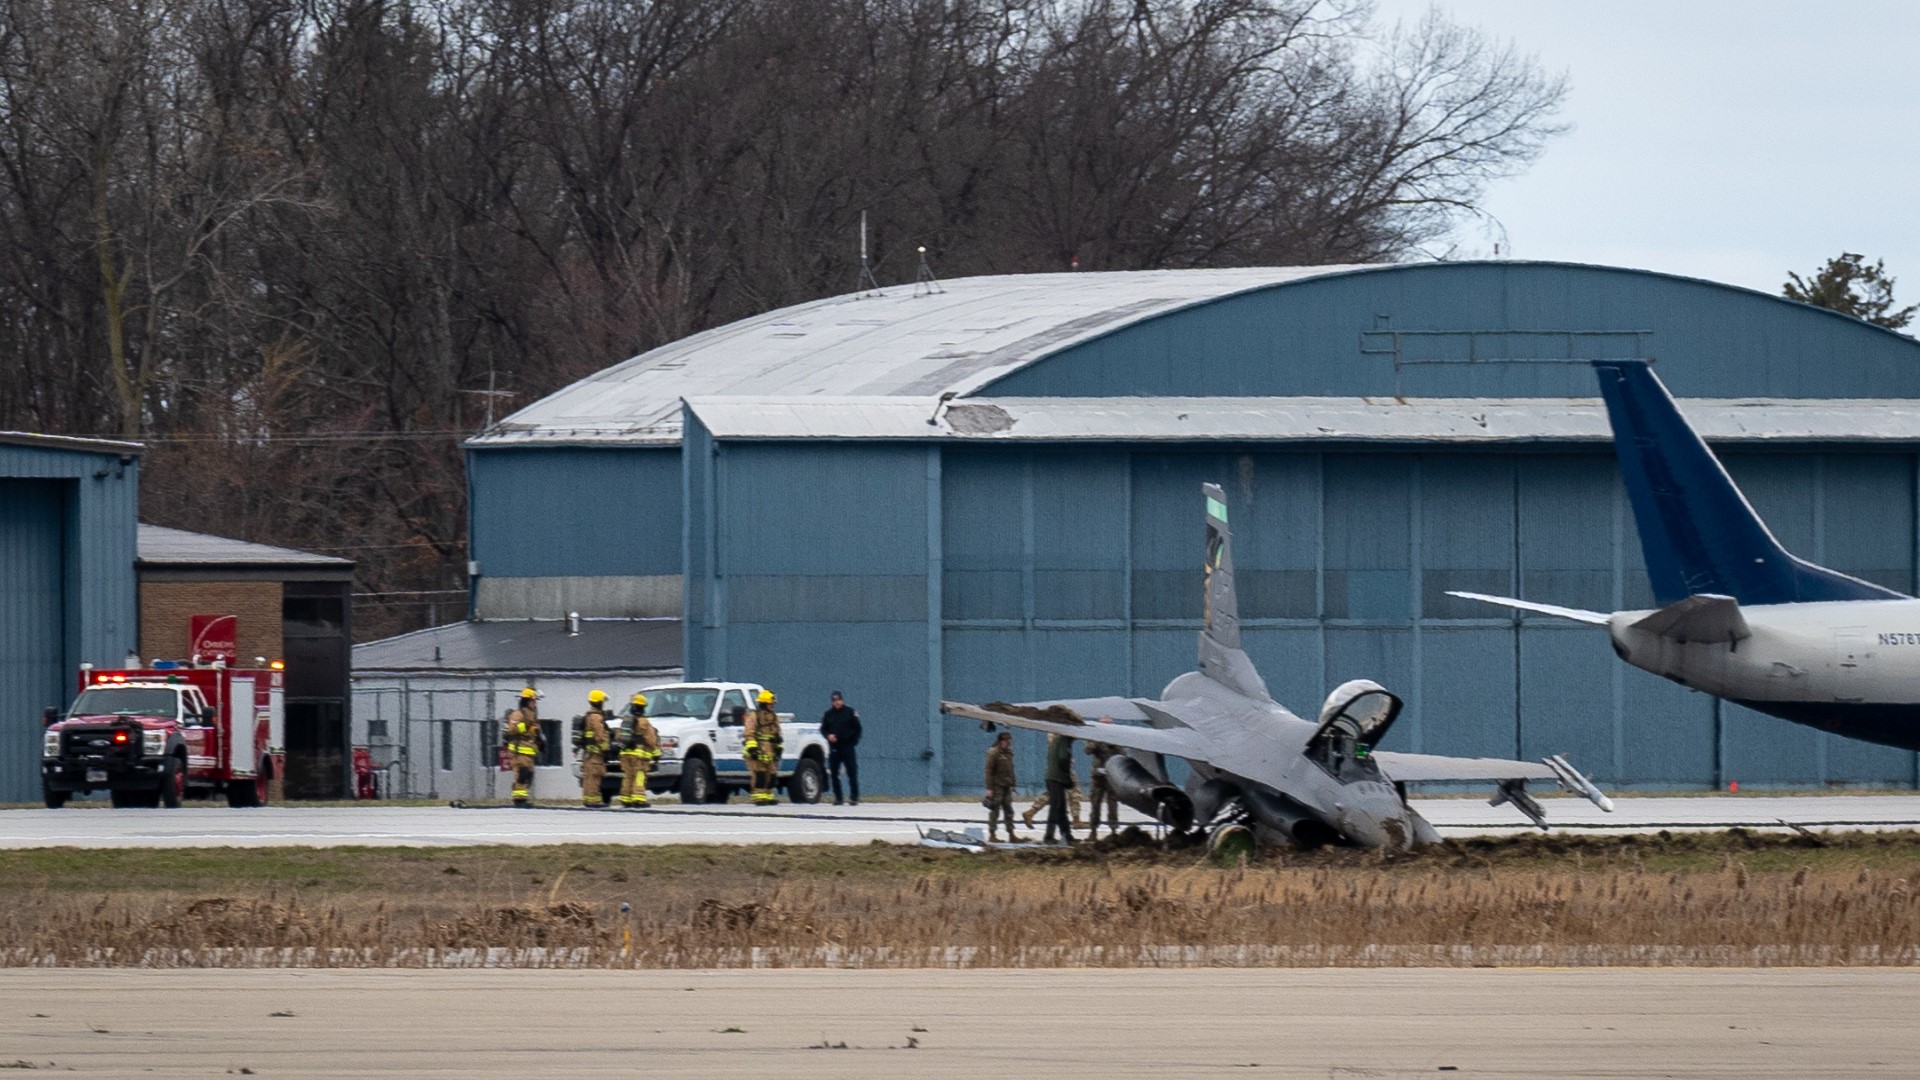 The pilot safely exited the aircraft, officials say.